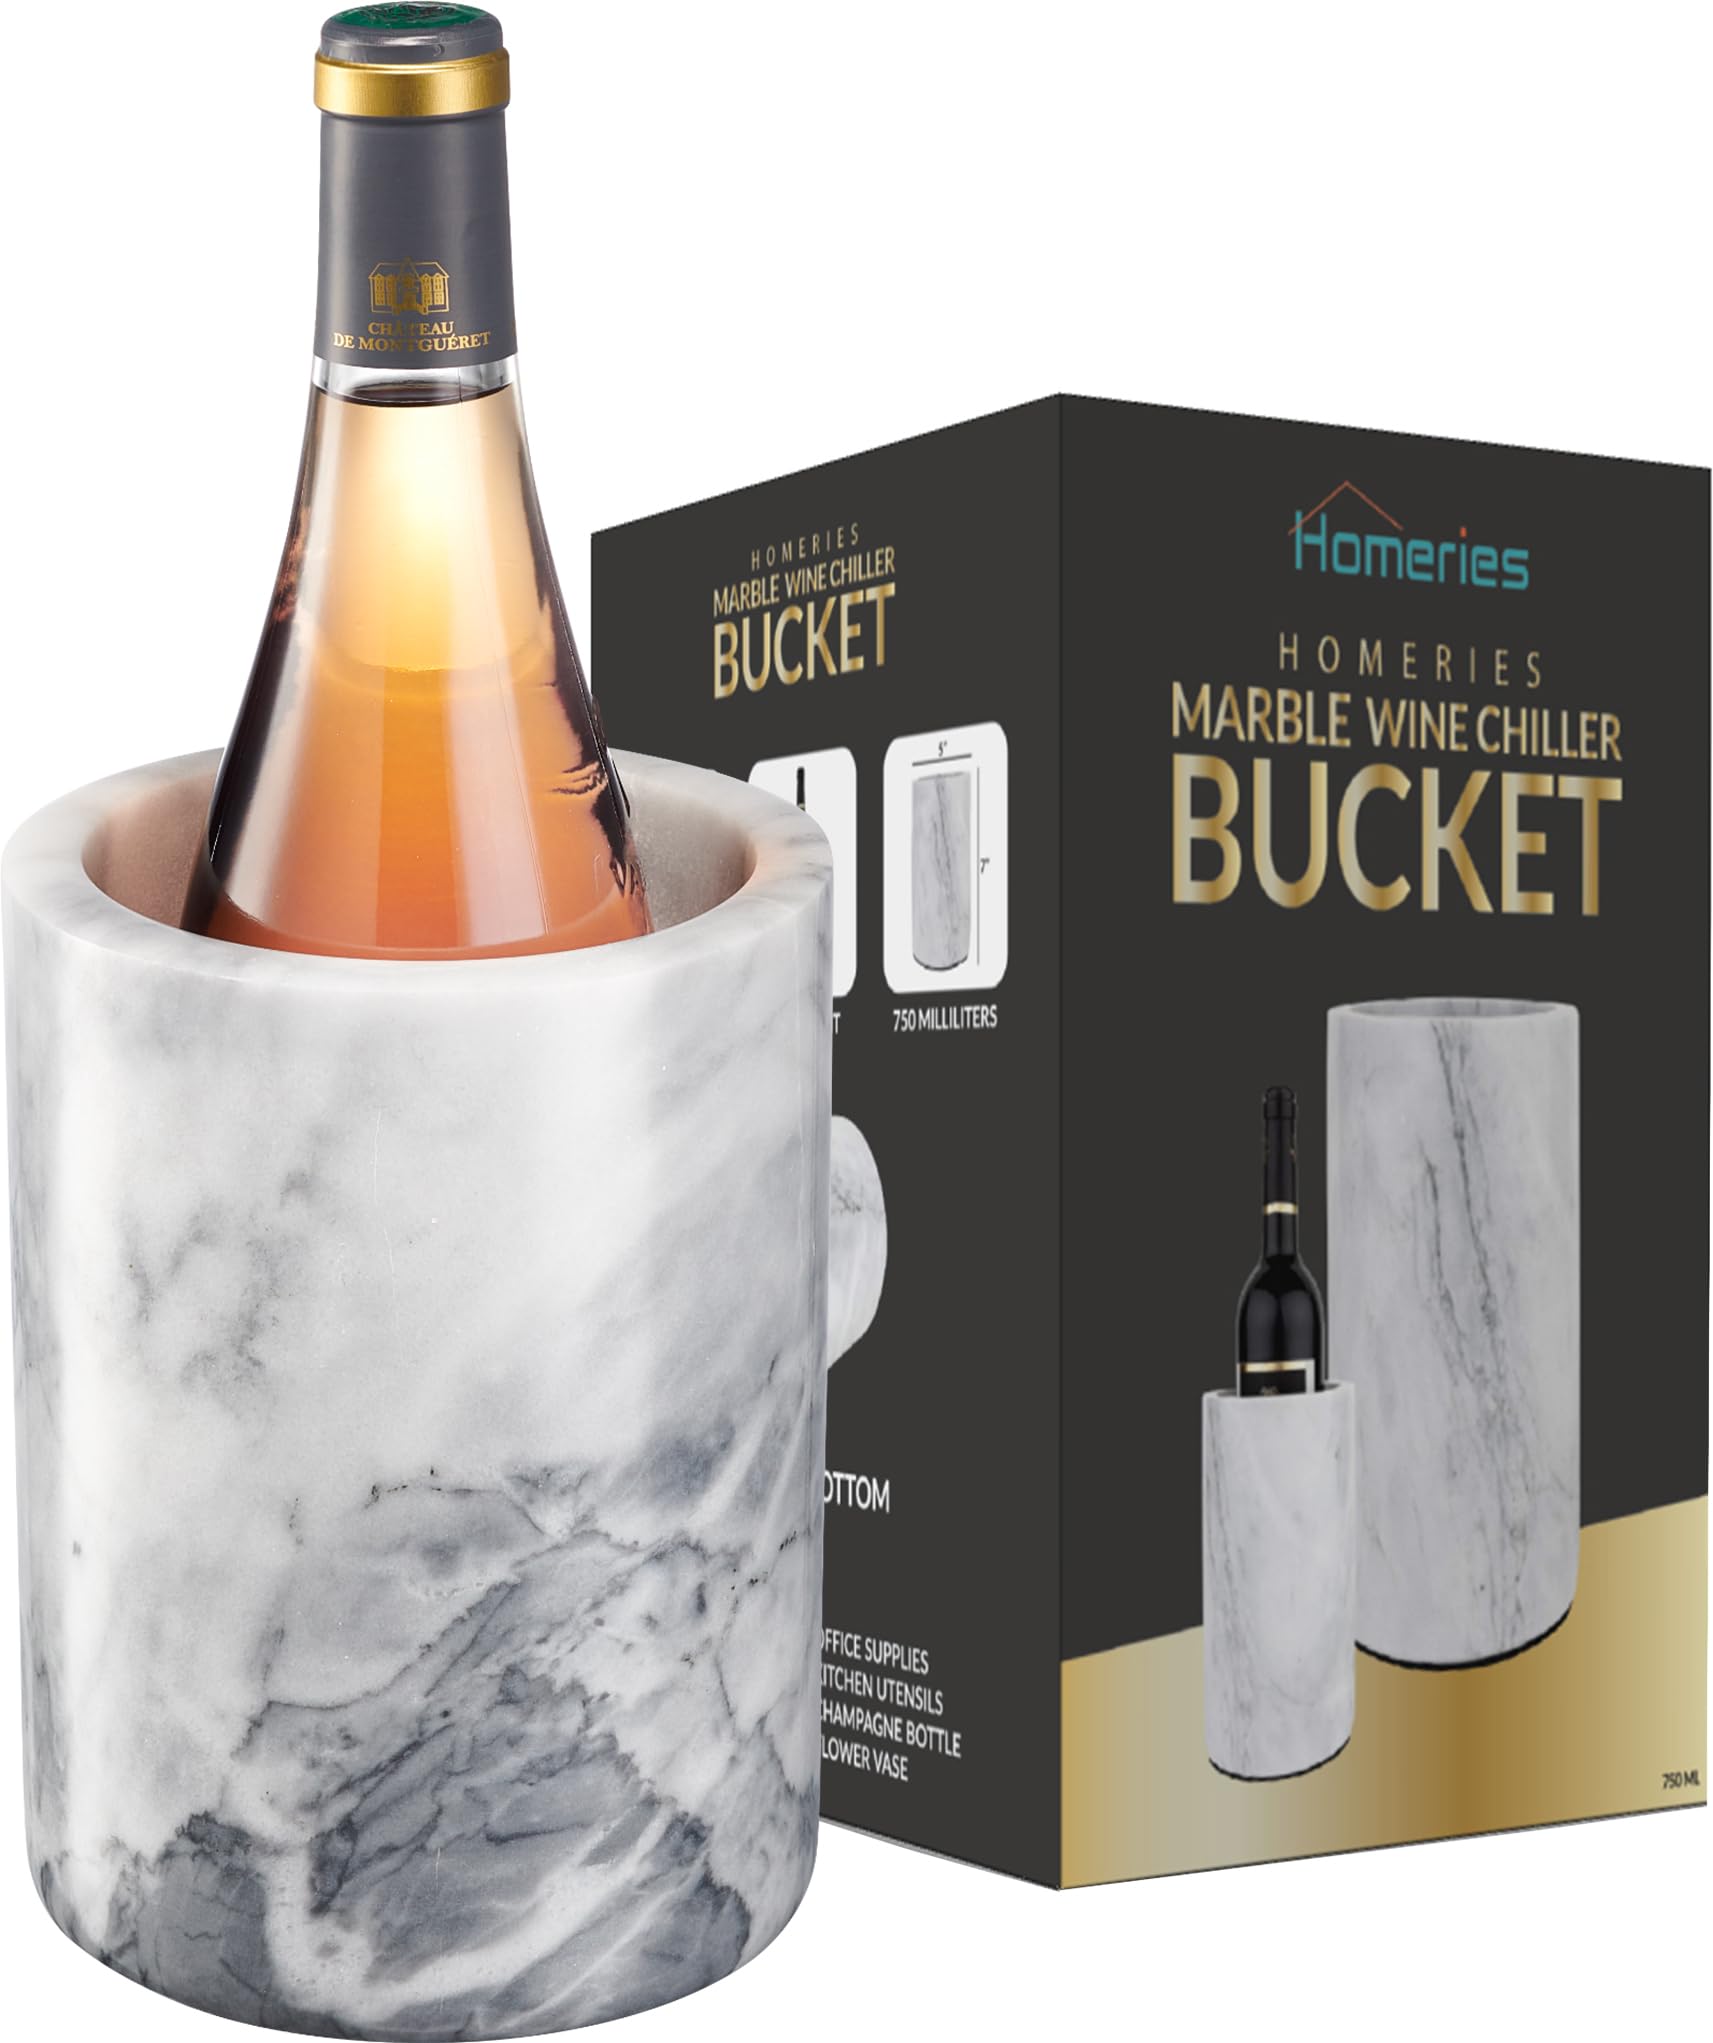 Homeries Marble Wine Chiller Bucket - Wine & Champagne Cooler for Parties, Dinner � Keep Wine & Beverages Cold � Holds Any 750ml Bottle - Ideal Gift for Wine Enthusiasts  - Good